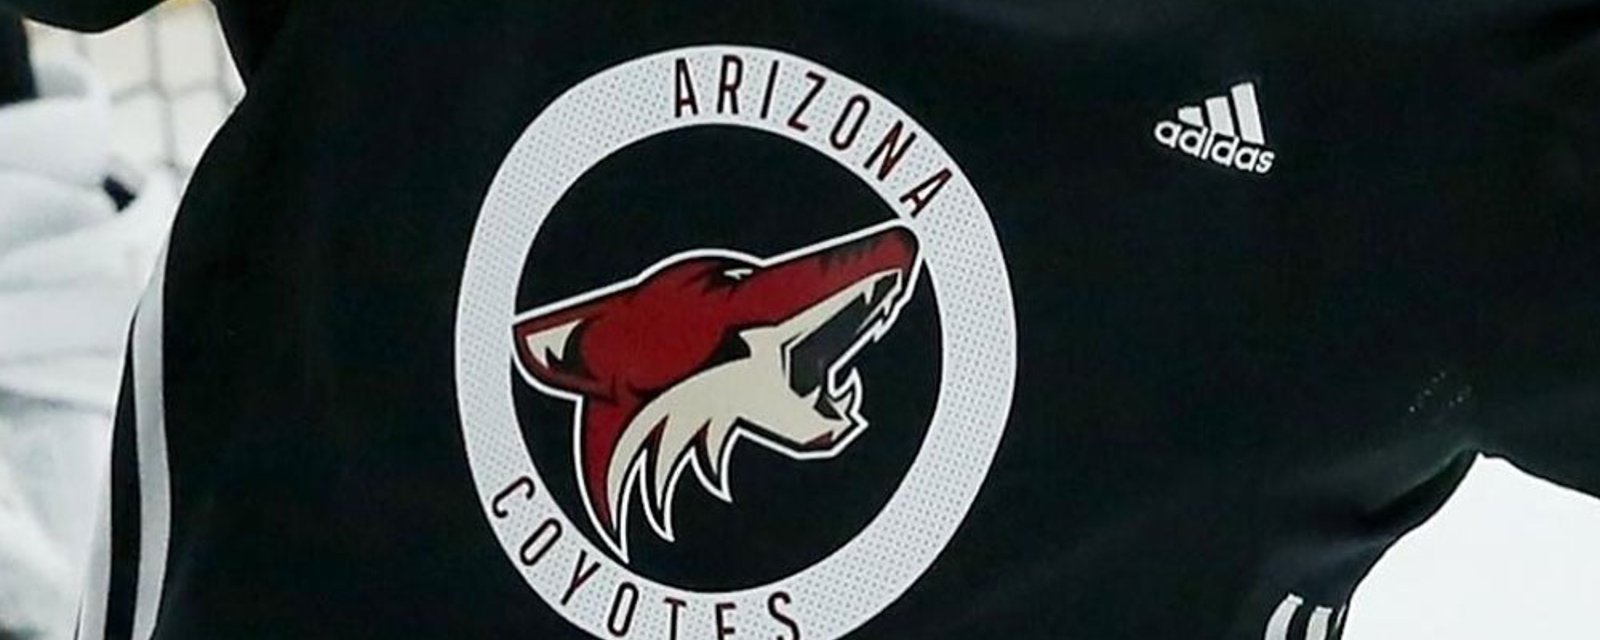 Coyotes' owner is now desperately seeking buyers